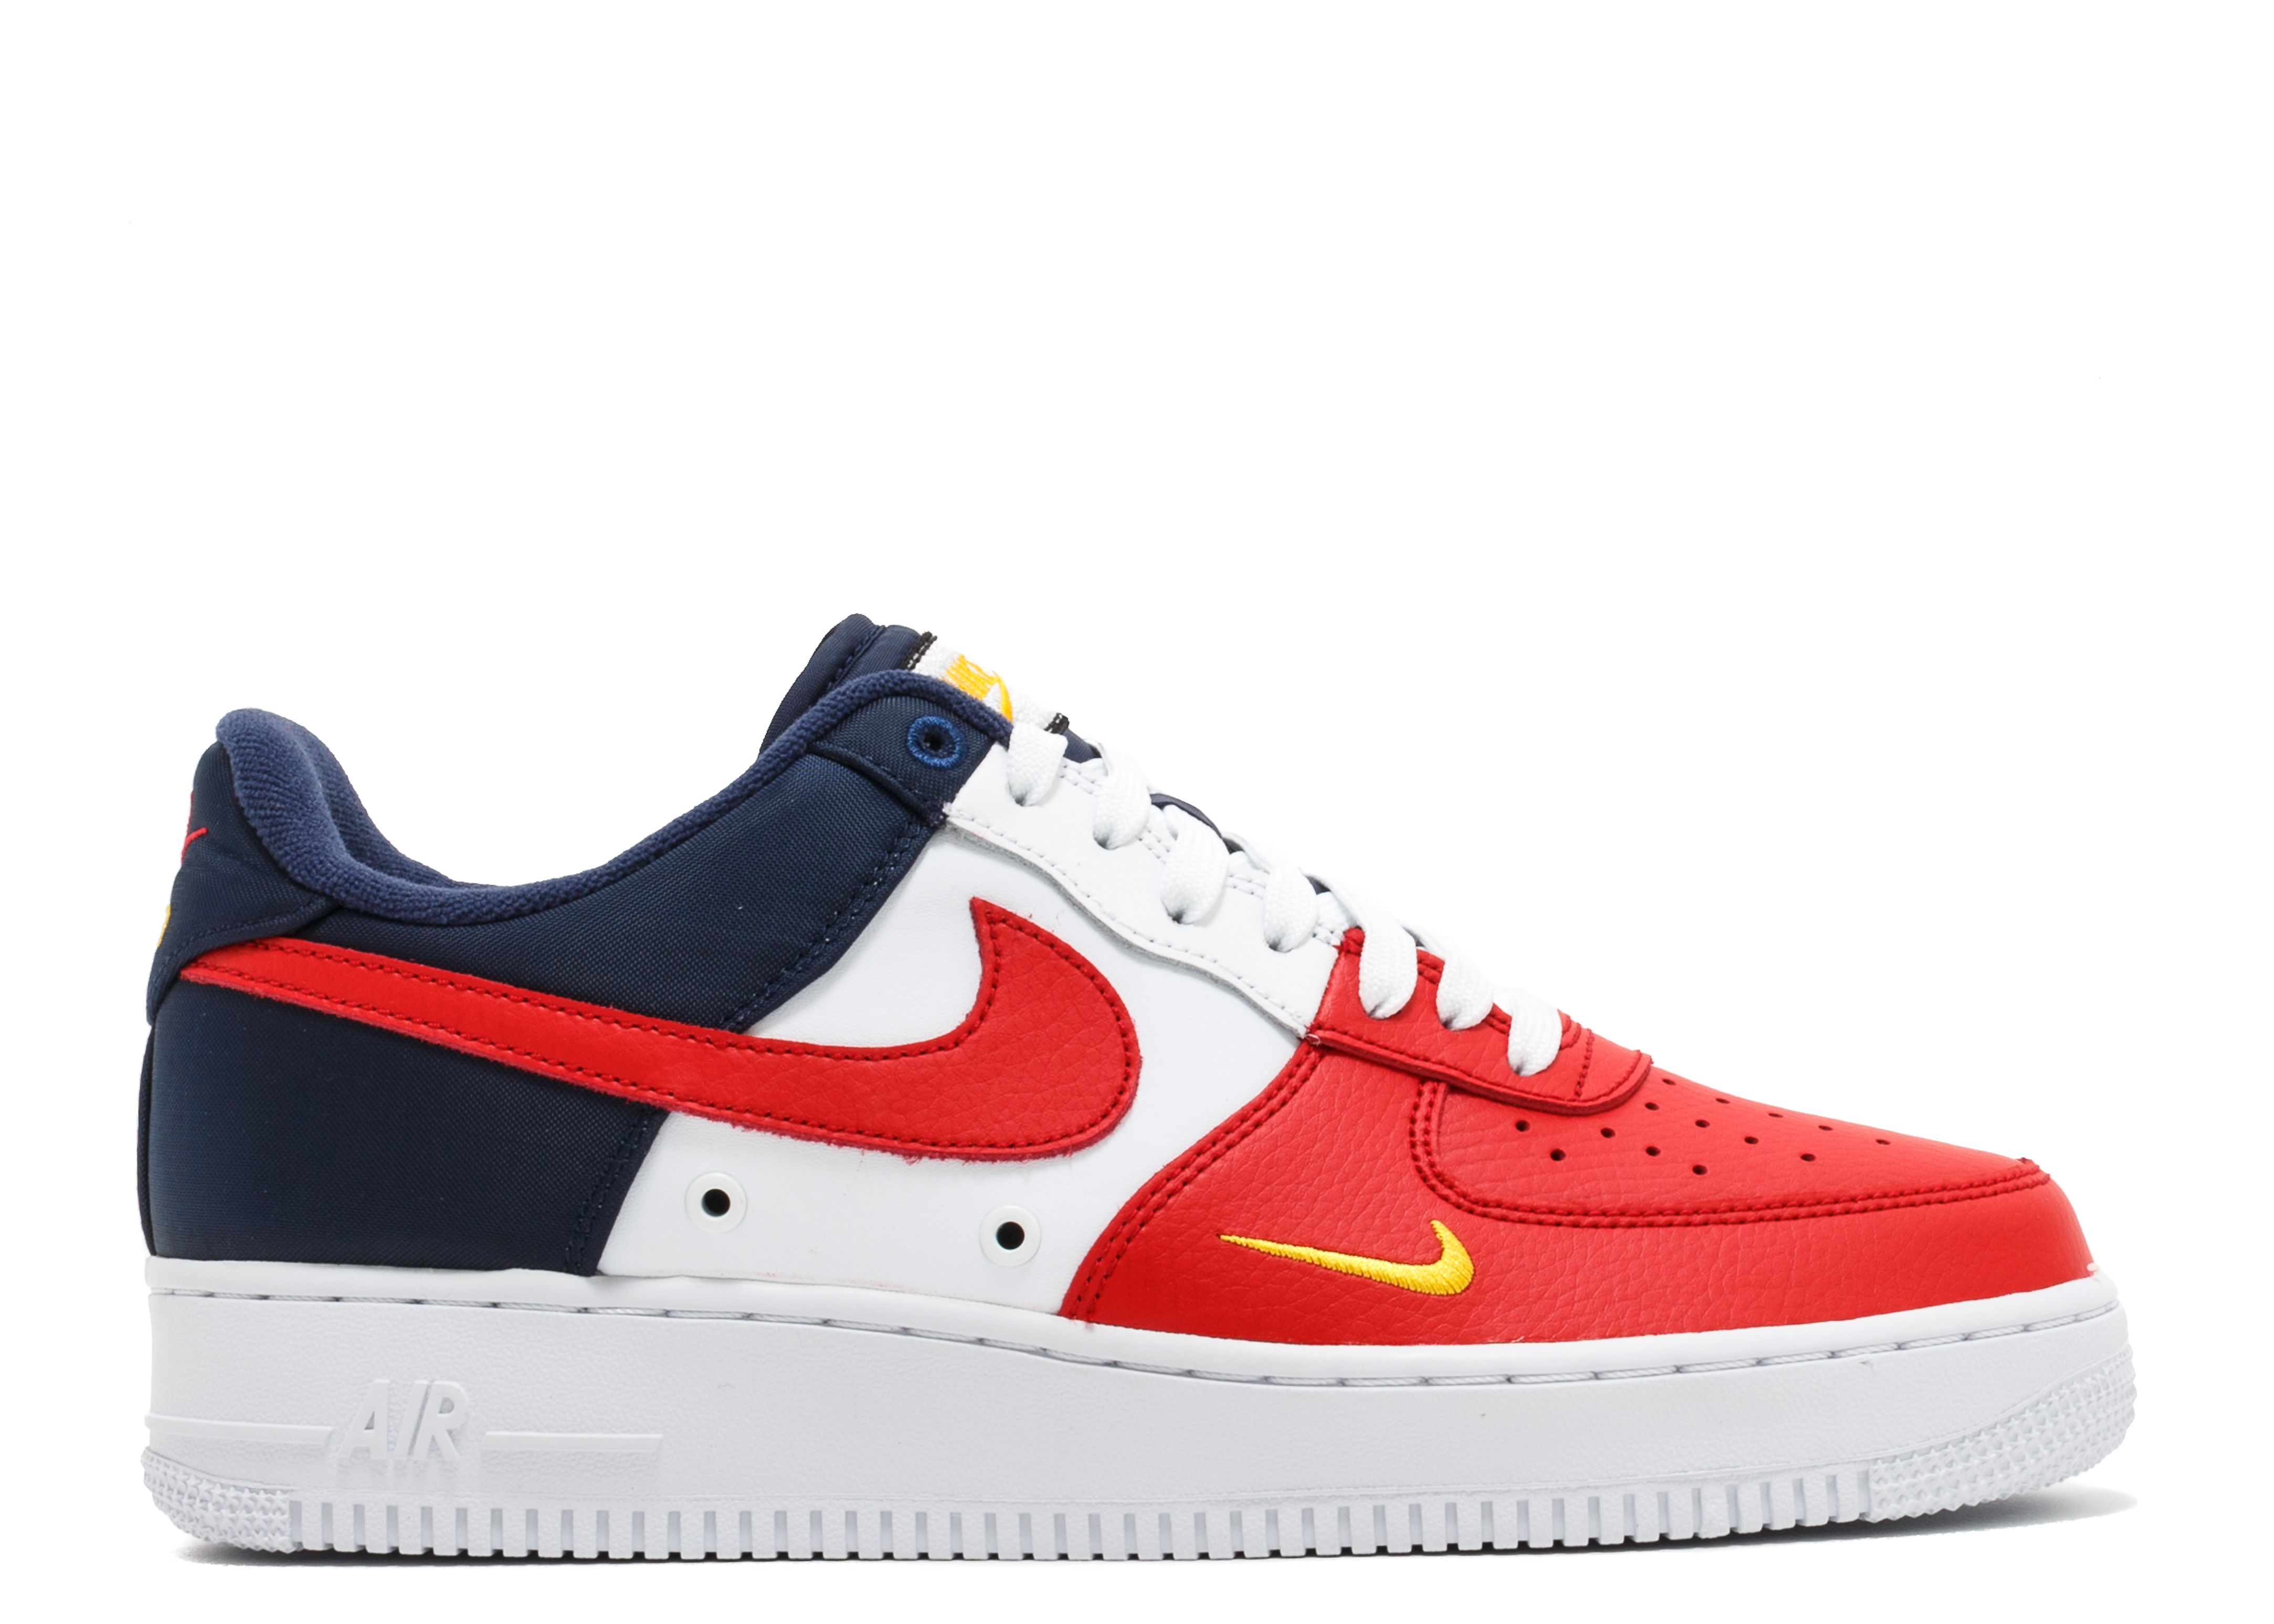 4 of july air force 1